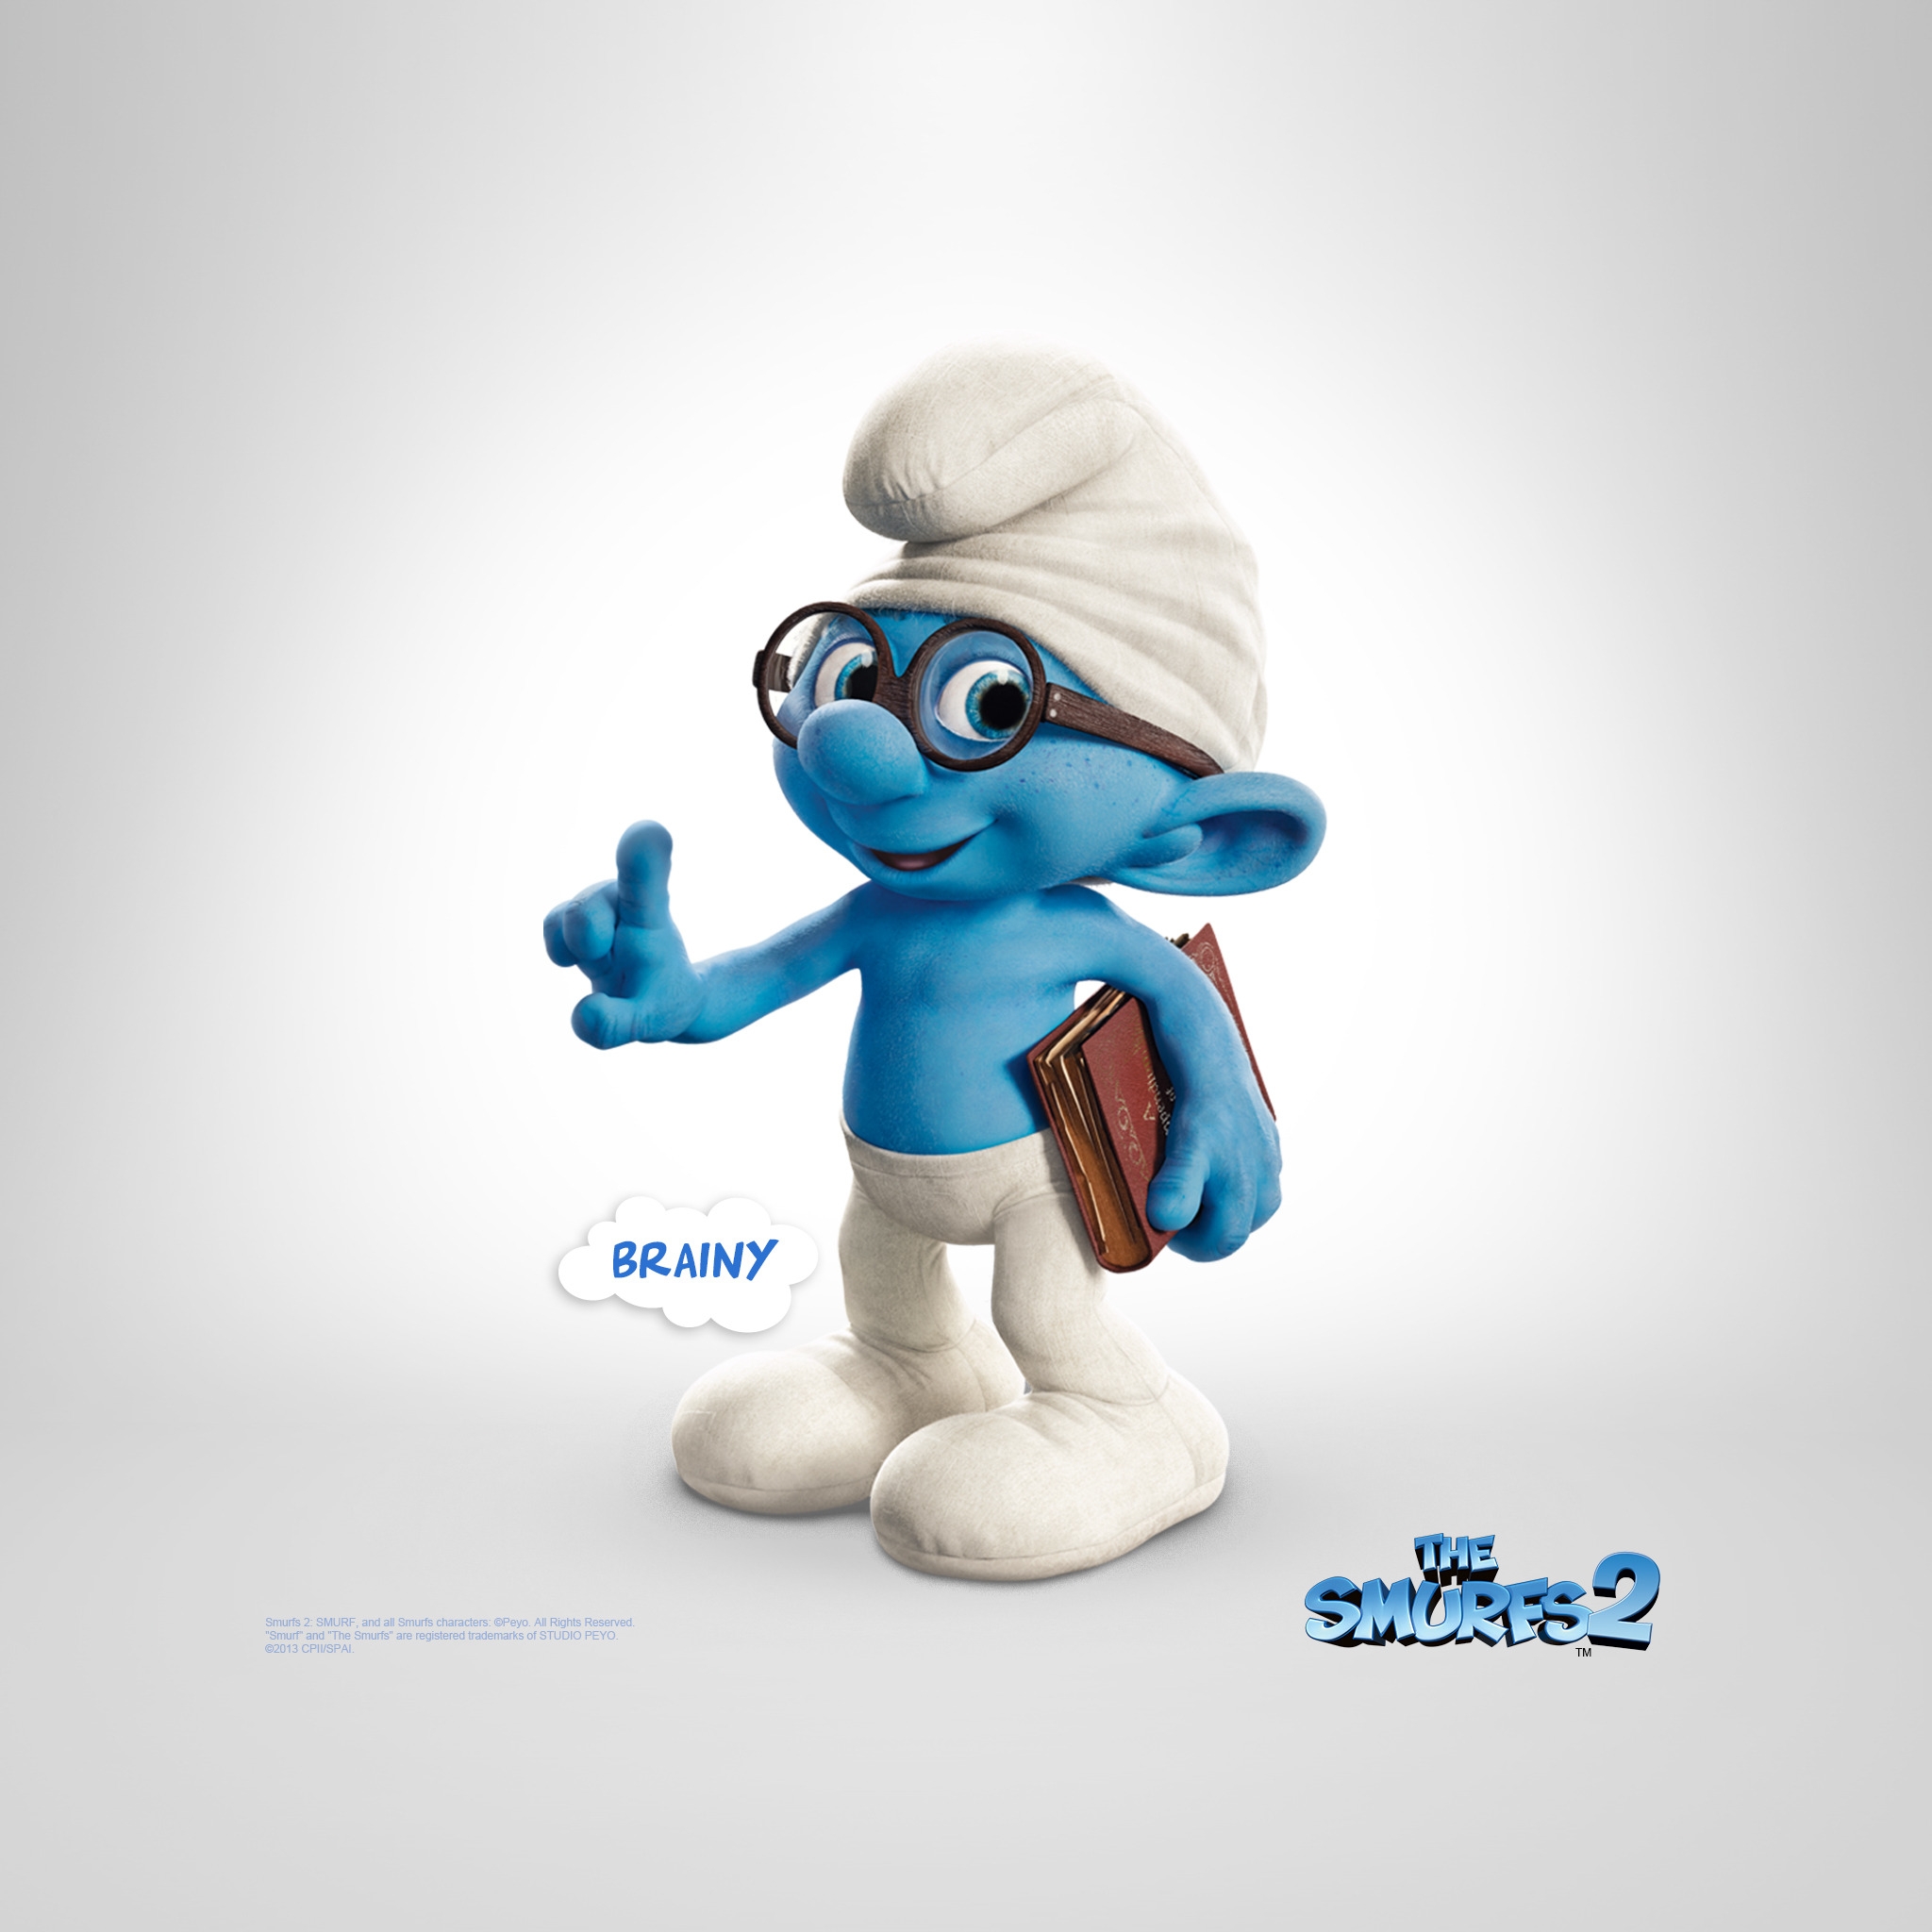 Brainy The Smurfs 2 for 2048 x 2048 New iPad resolution